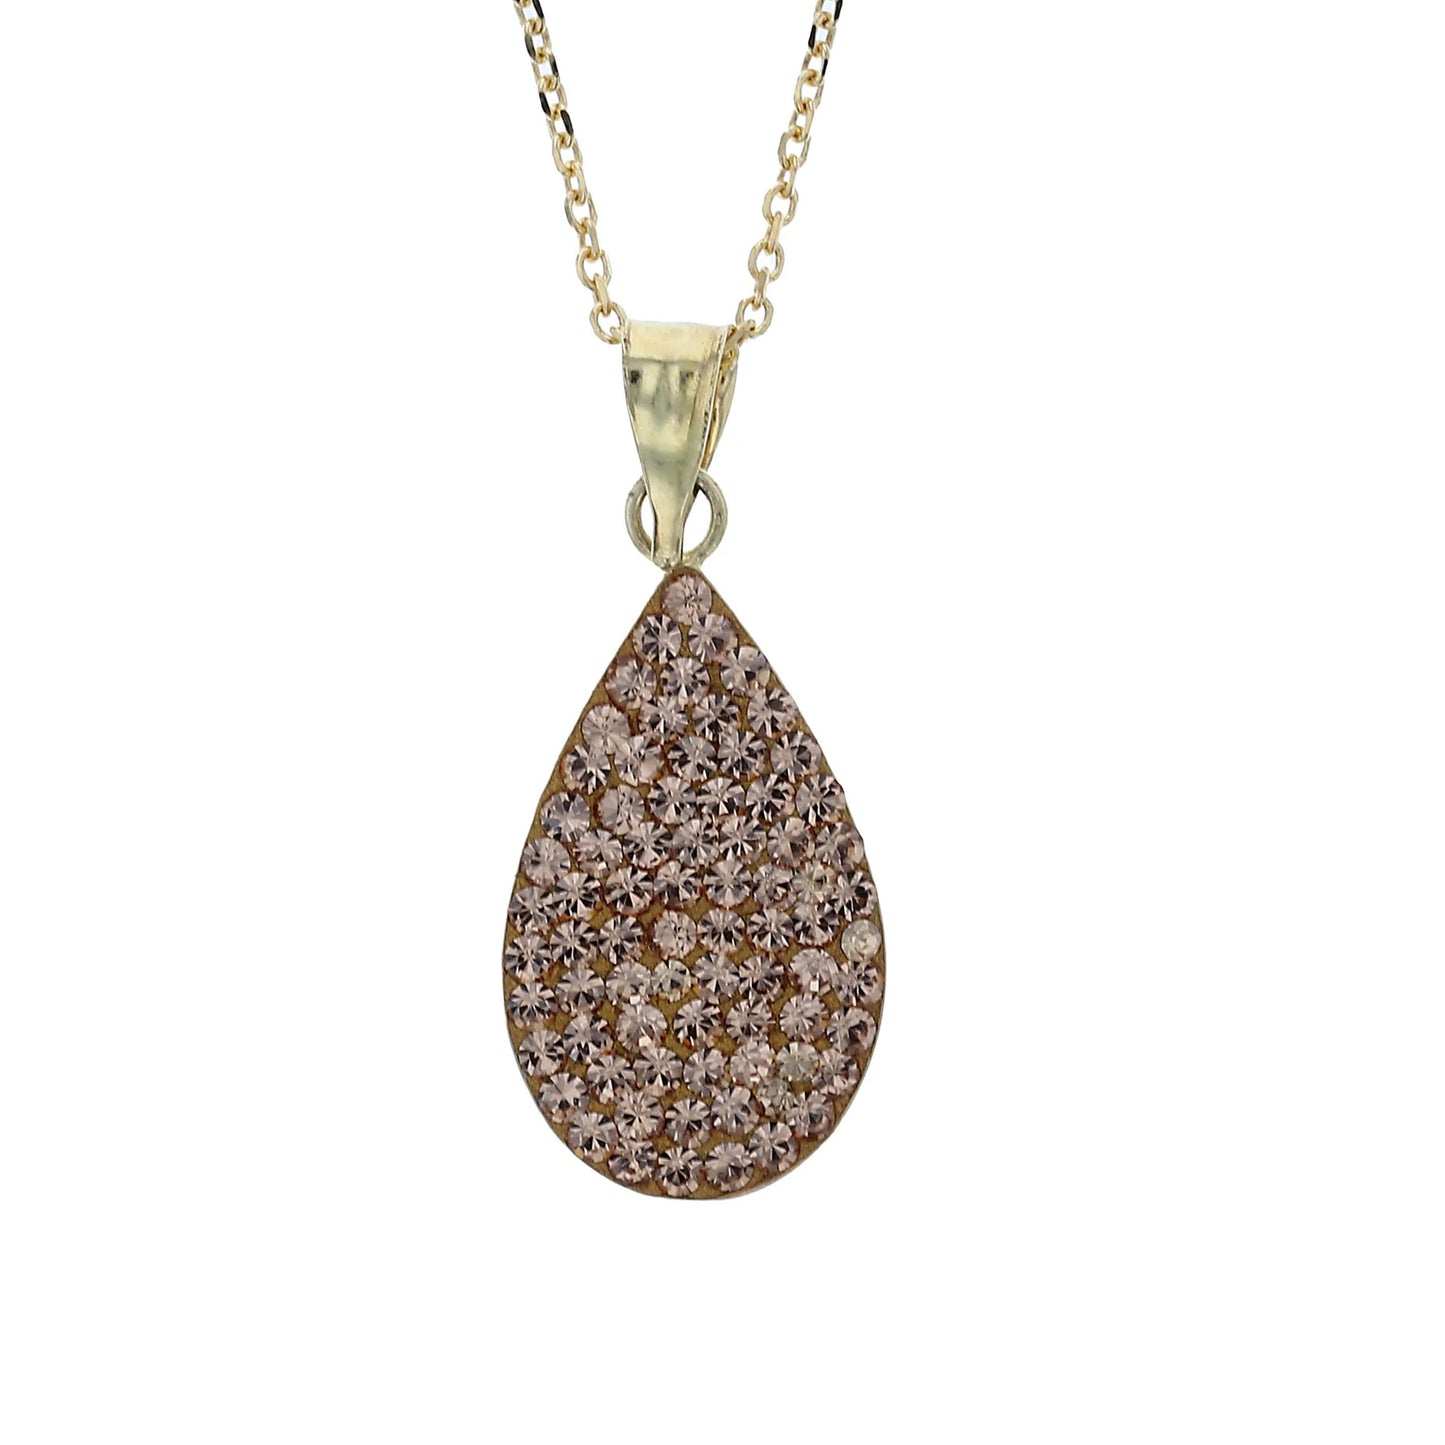 18K Gold Plated Sterling Silver Tear Drop Pendant Necklace with Light Colorado Topaz Crystals